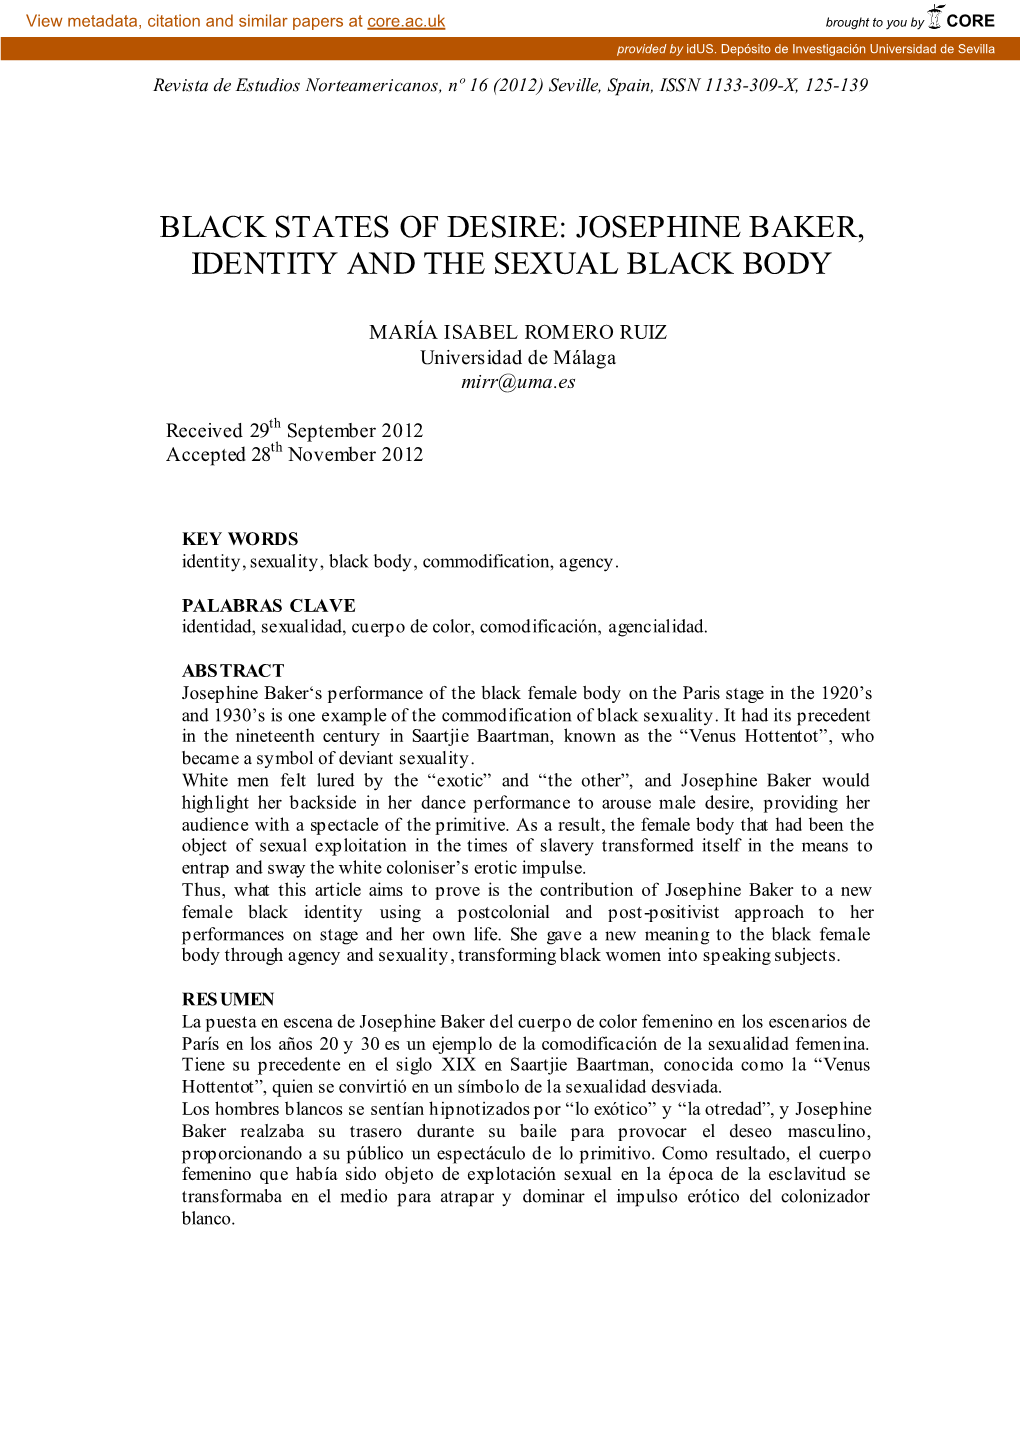 Josephine Baker, Identity and the Black Sexual Body